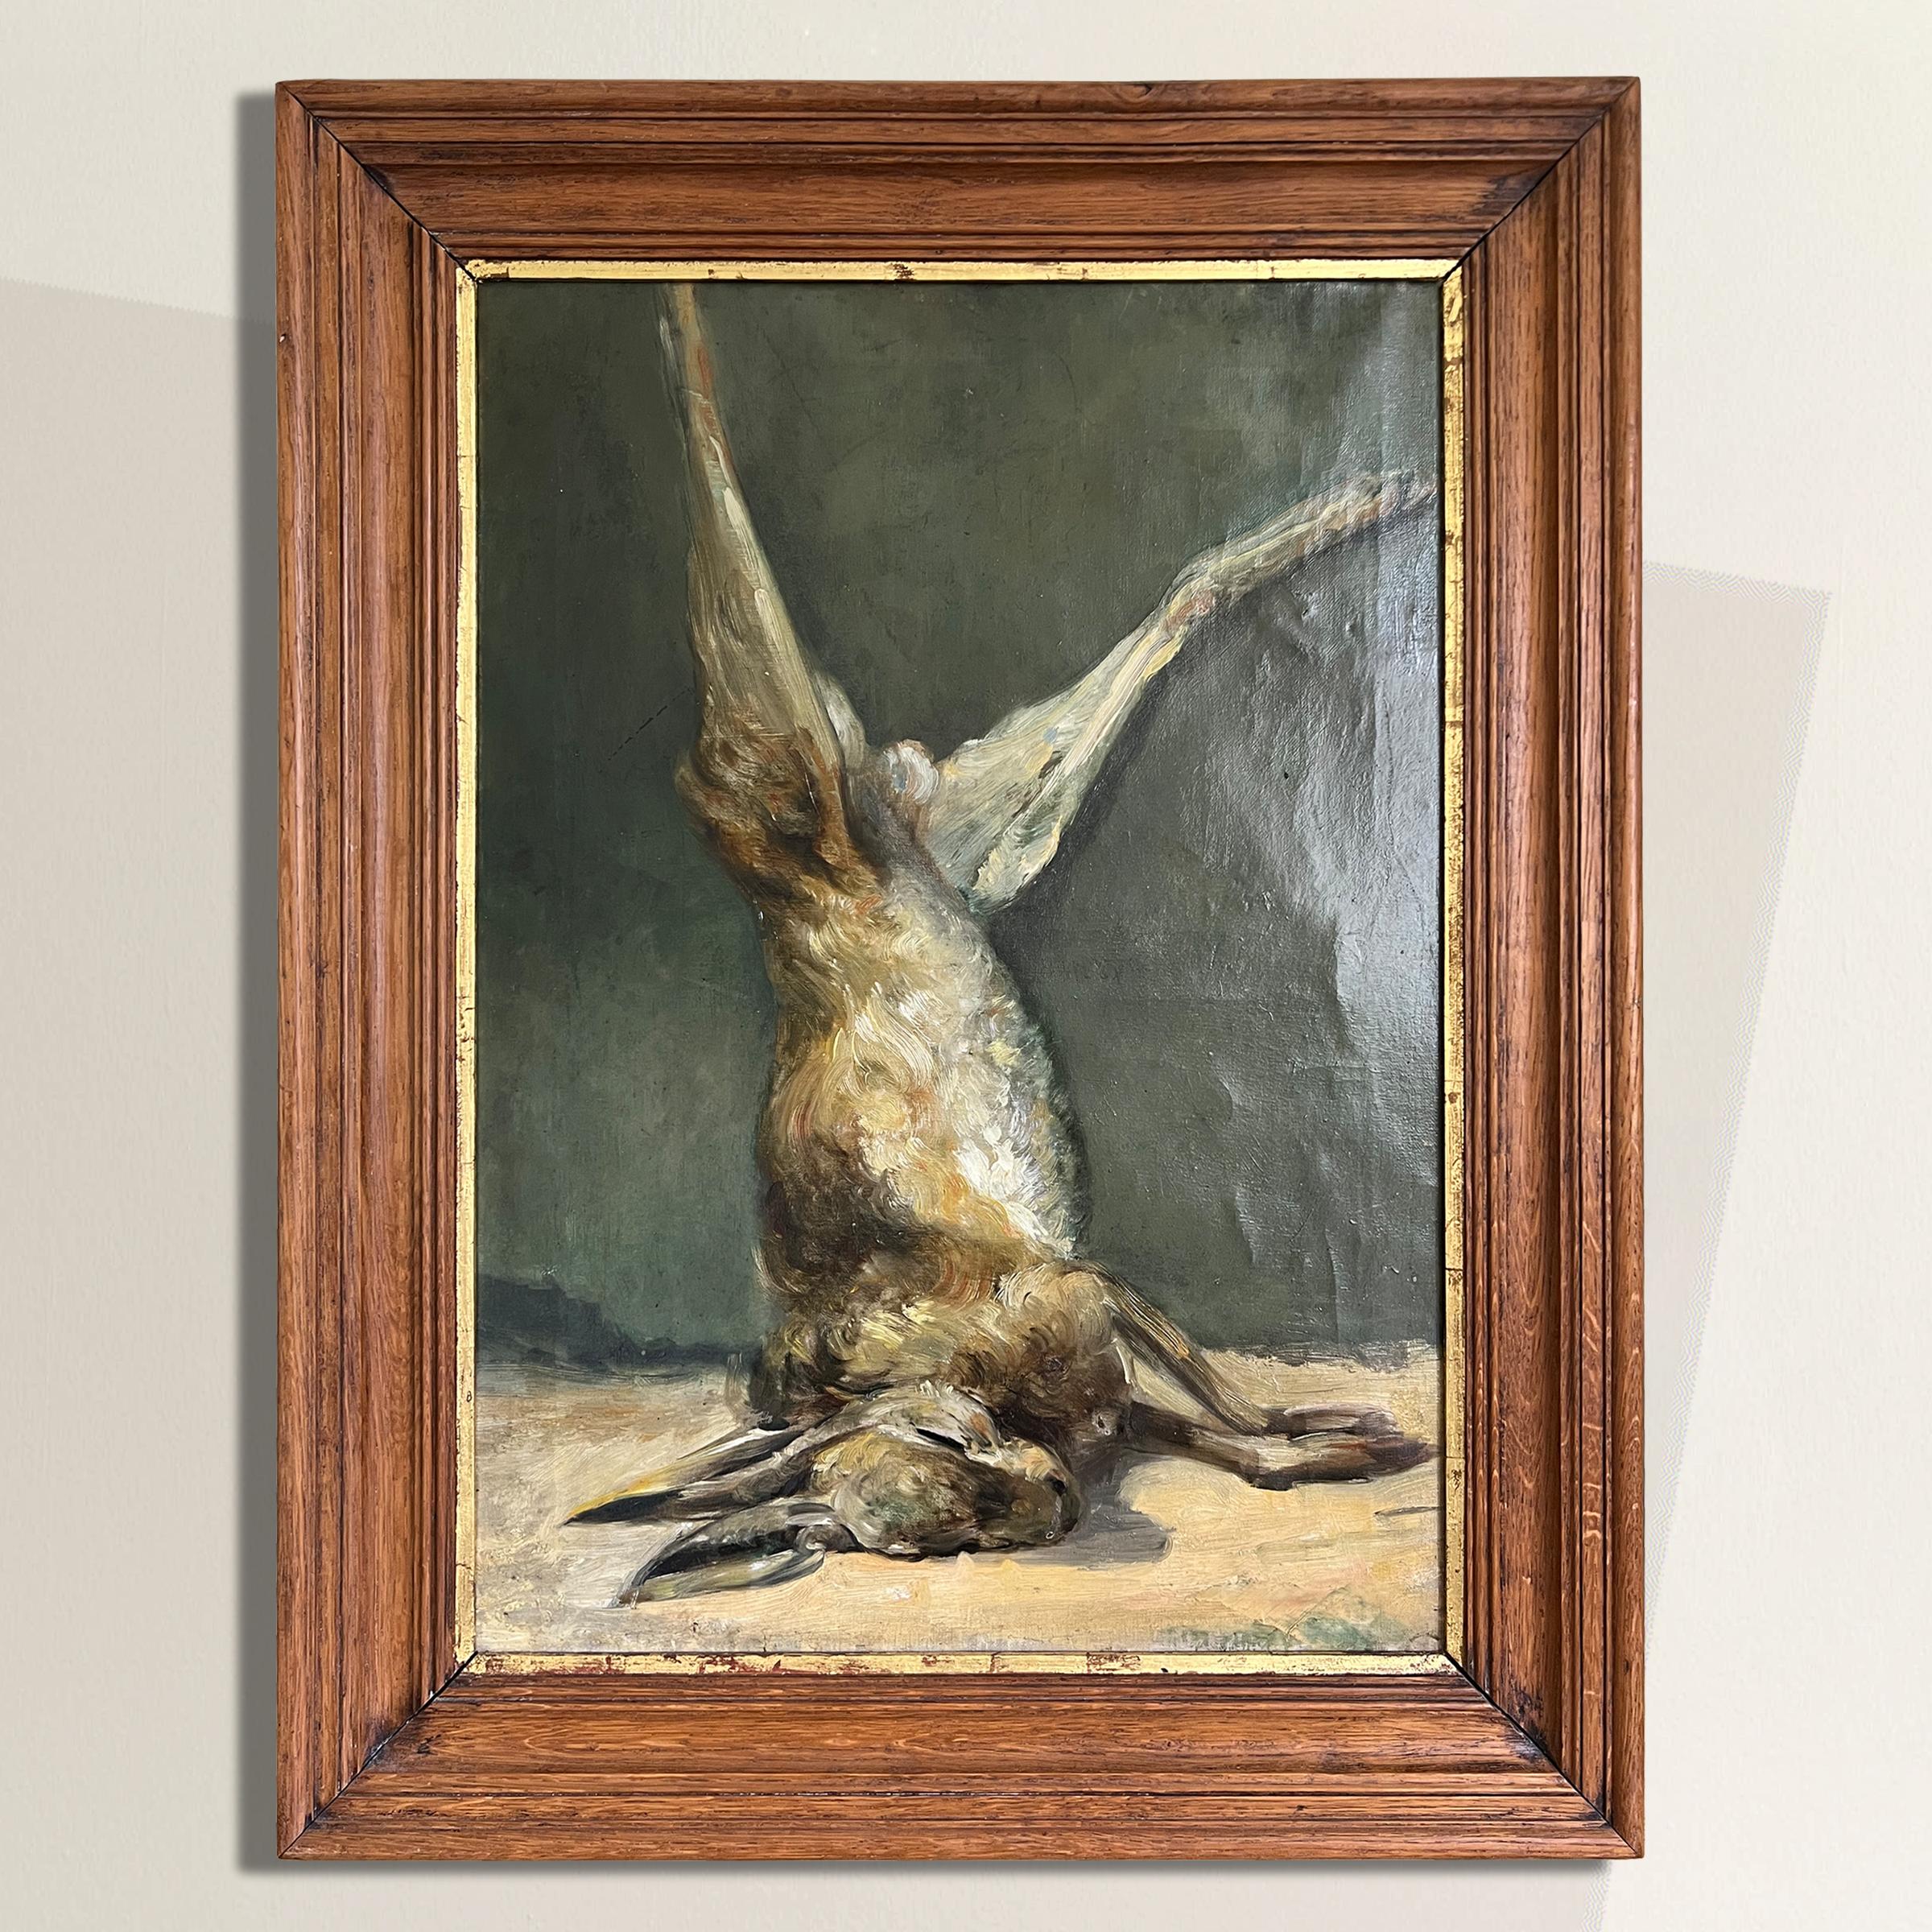 A stunning 19th century Belgian oil on linen still life painting depicting a hare hunting trophy with incredible attention to detail including the tactile appeal of the hare's fur. Hunting was a major pastime of the nobility, and paintings of the